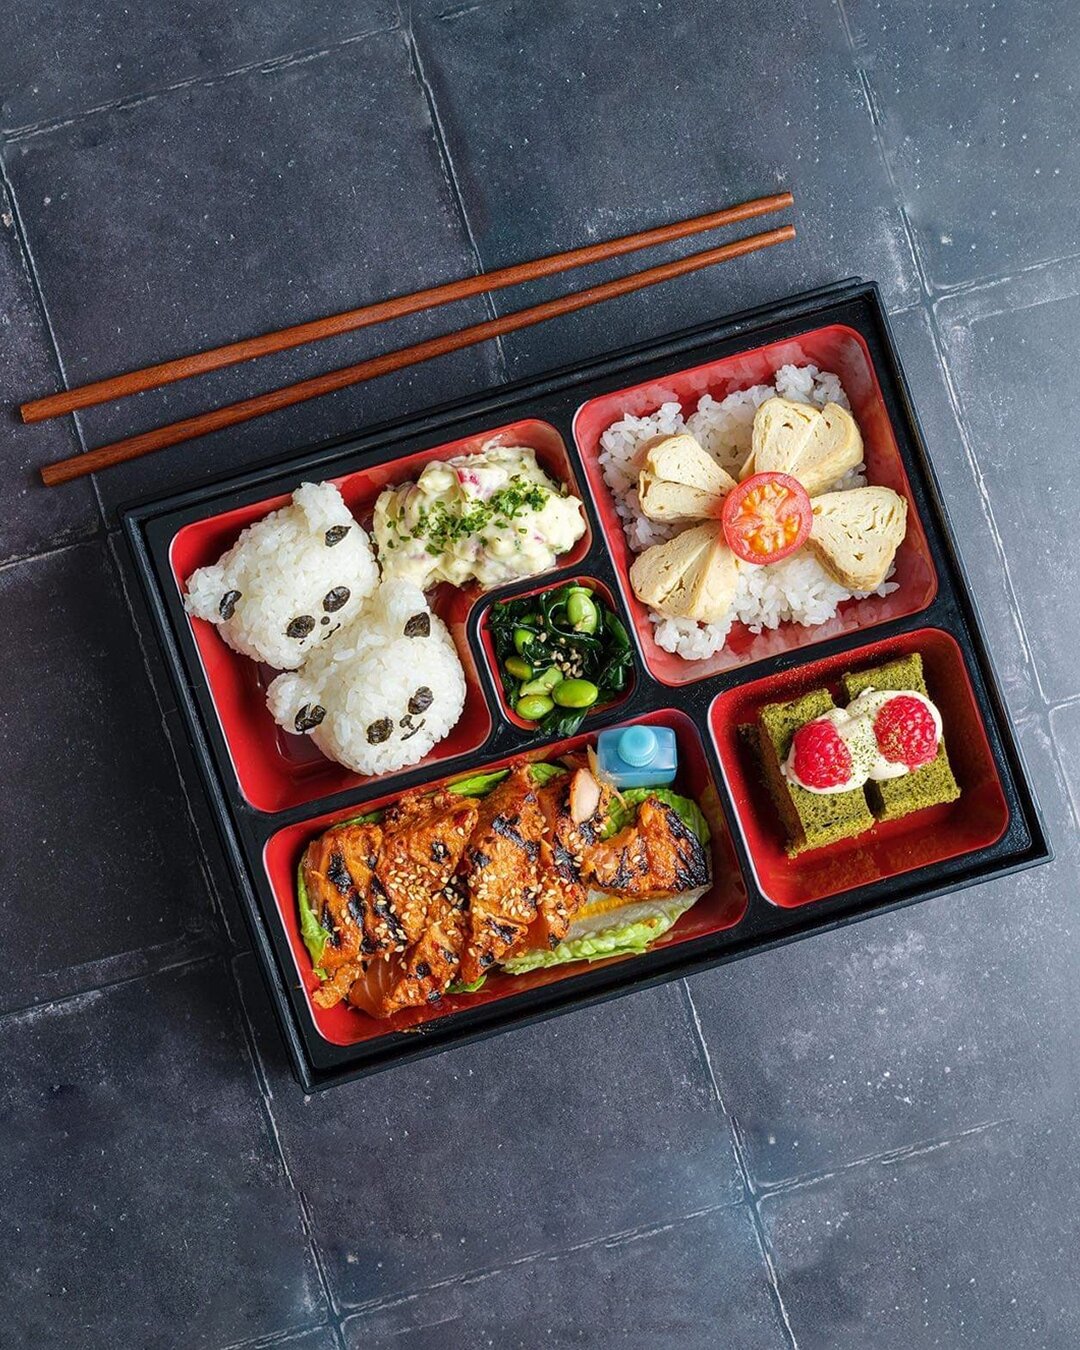 Get ready to add some fun and colour to your lunchtime routine! 🍱 Bento boxes have taken food presentation to a whole new level, with adorable characters and vibrant designs that will make your taste buds and your eyes happy.⁠
⁠
Here's one we made f